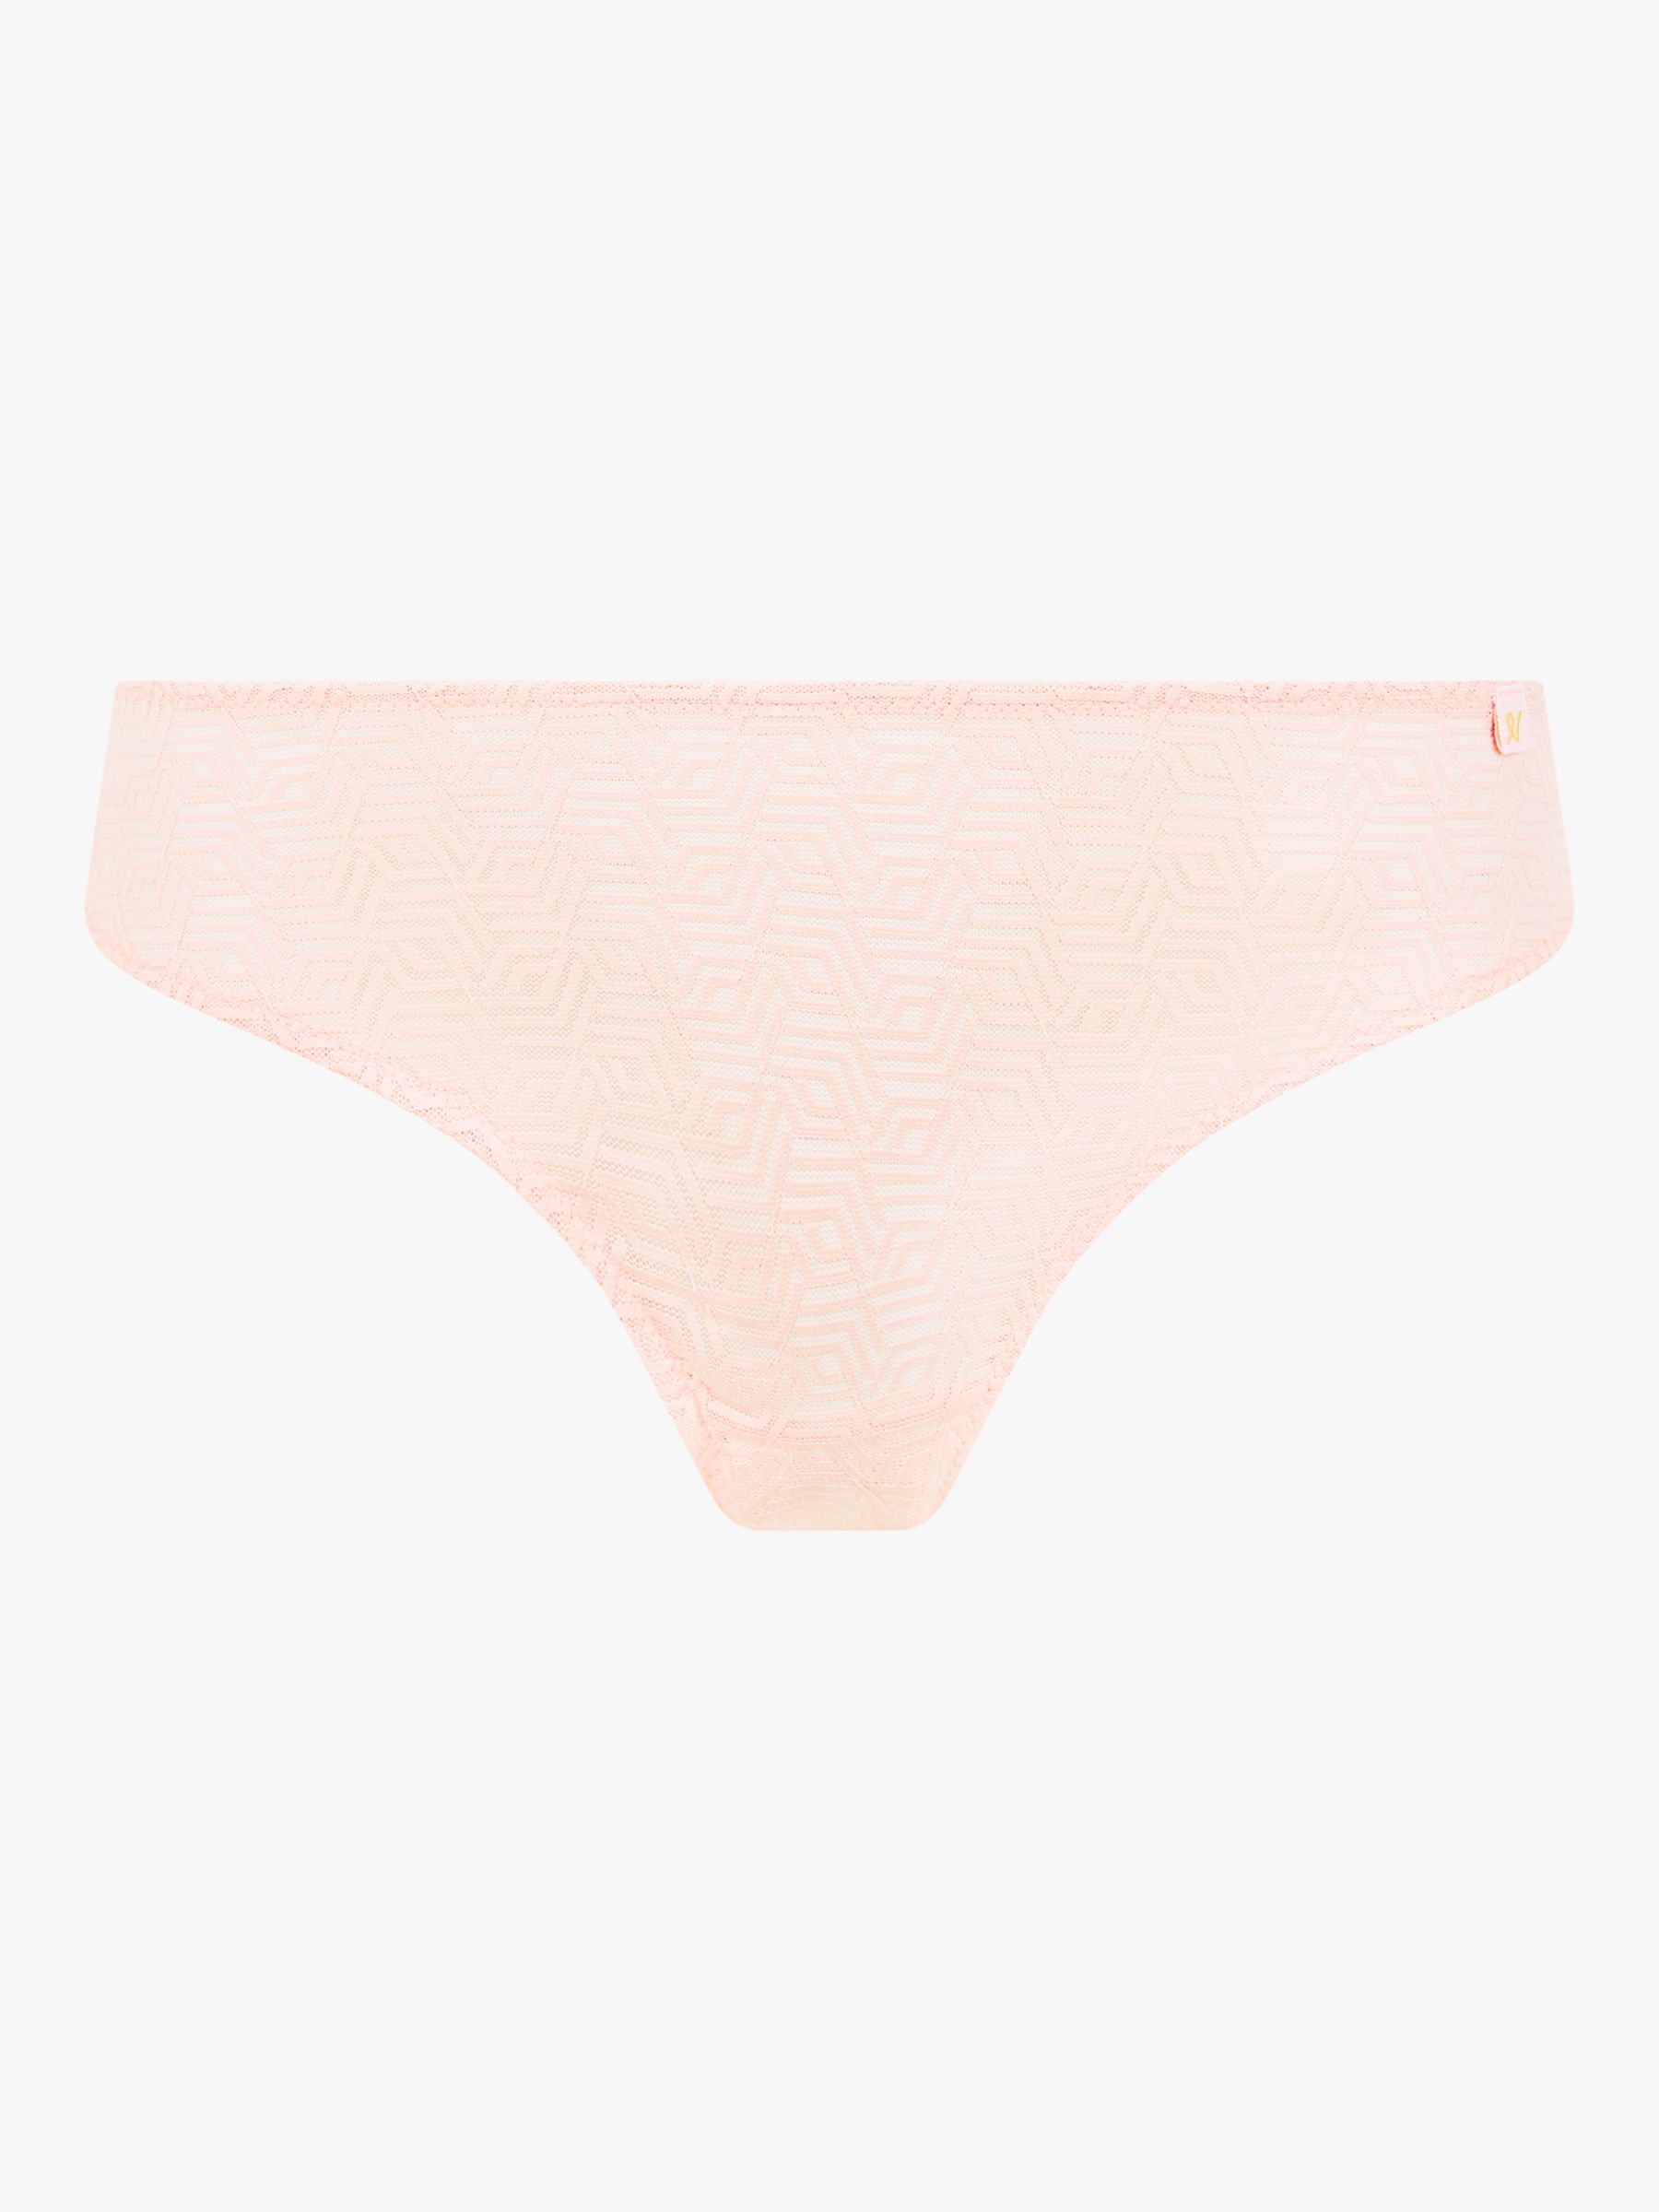 Nudea Barely There Geometric Thong, Blush Pink at John Lewis & Partners